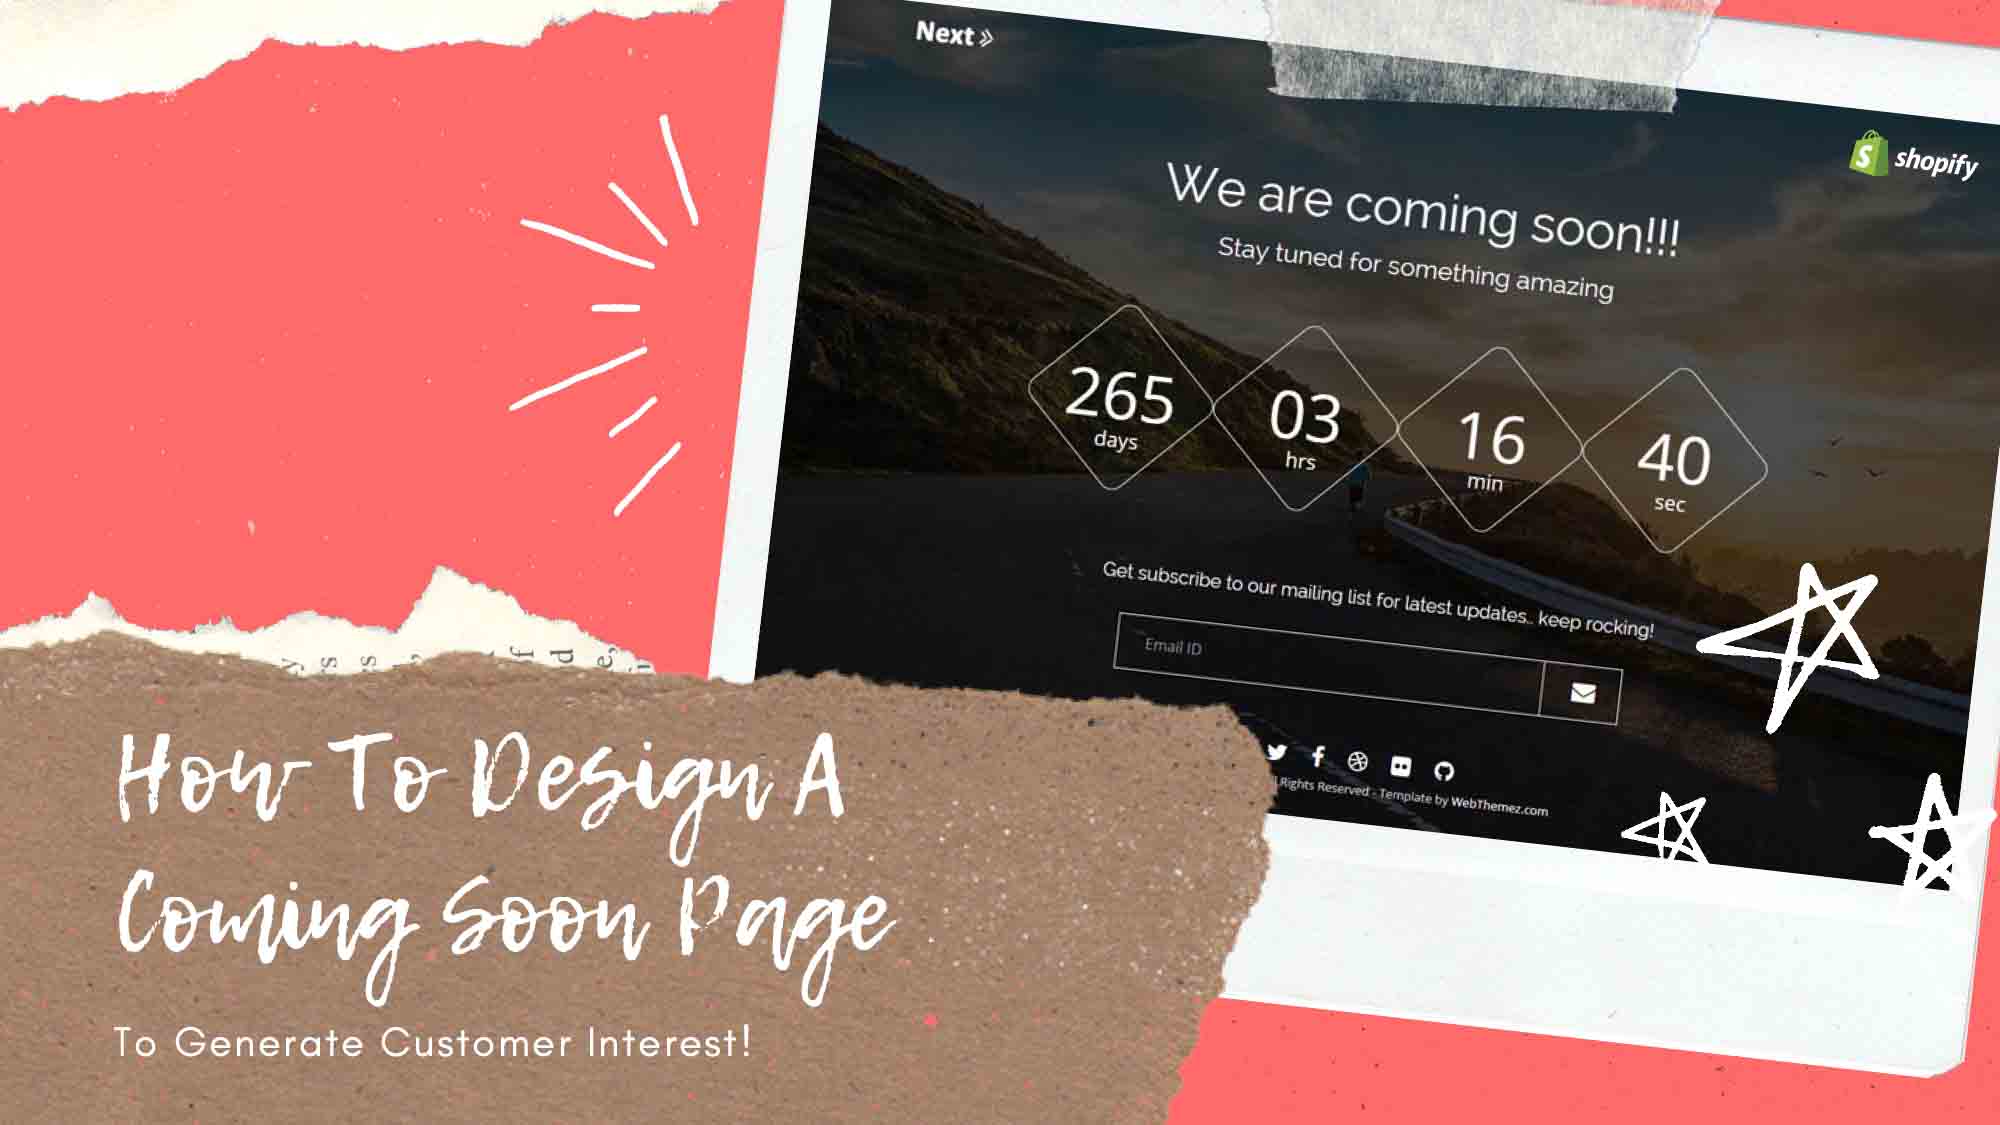 Know-How To Design A Coming Soon Page To Generate Customer Interest!